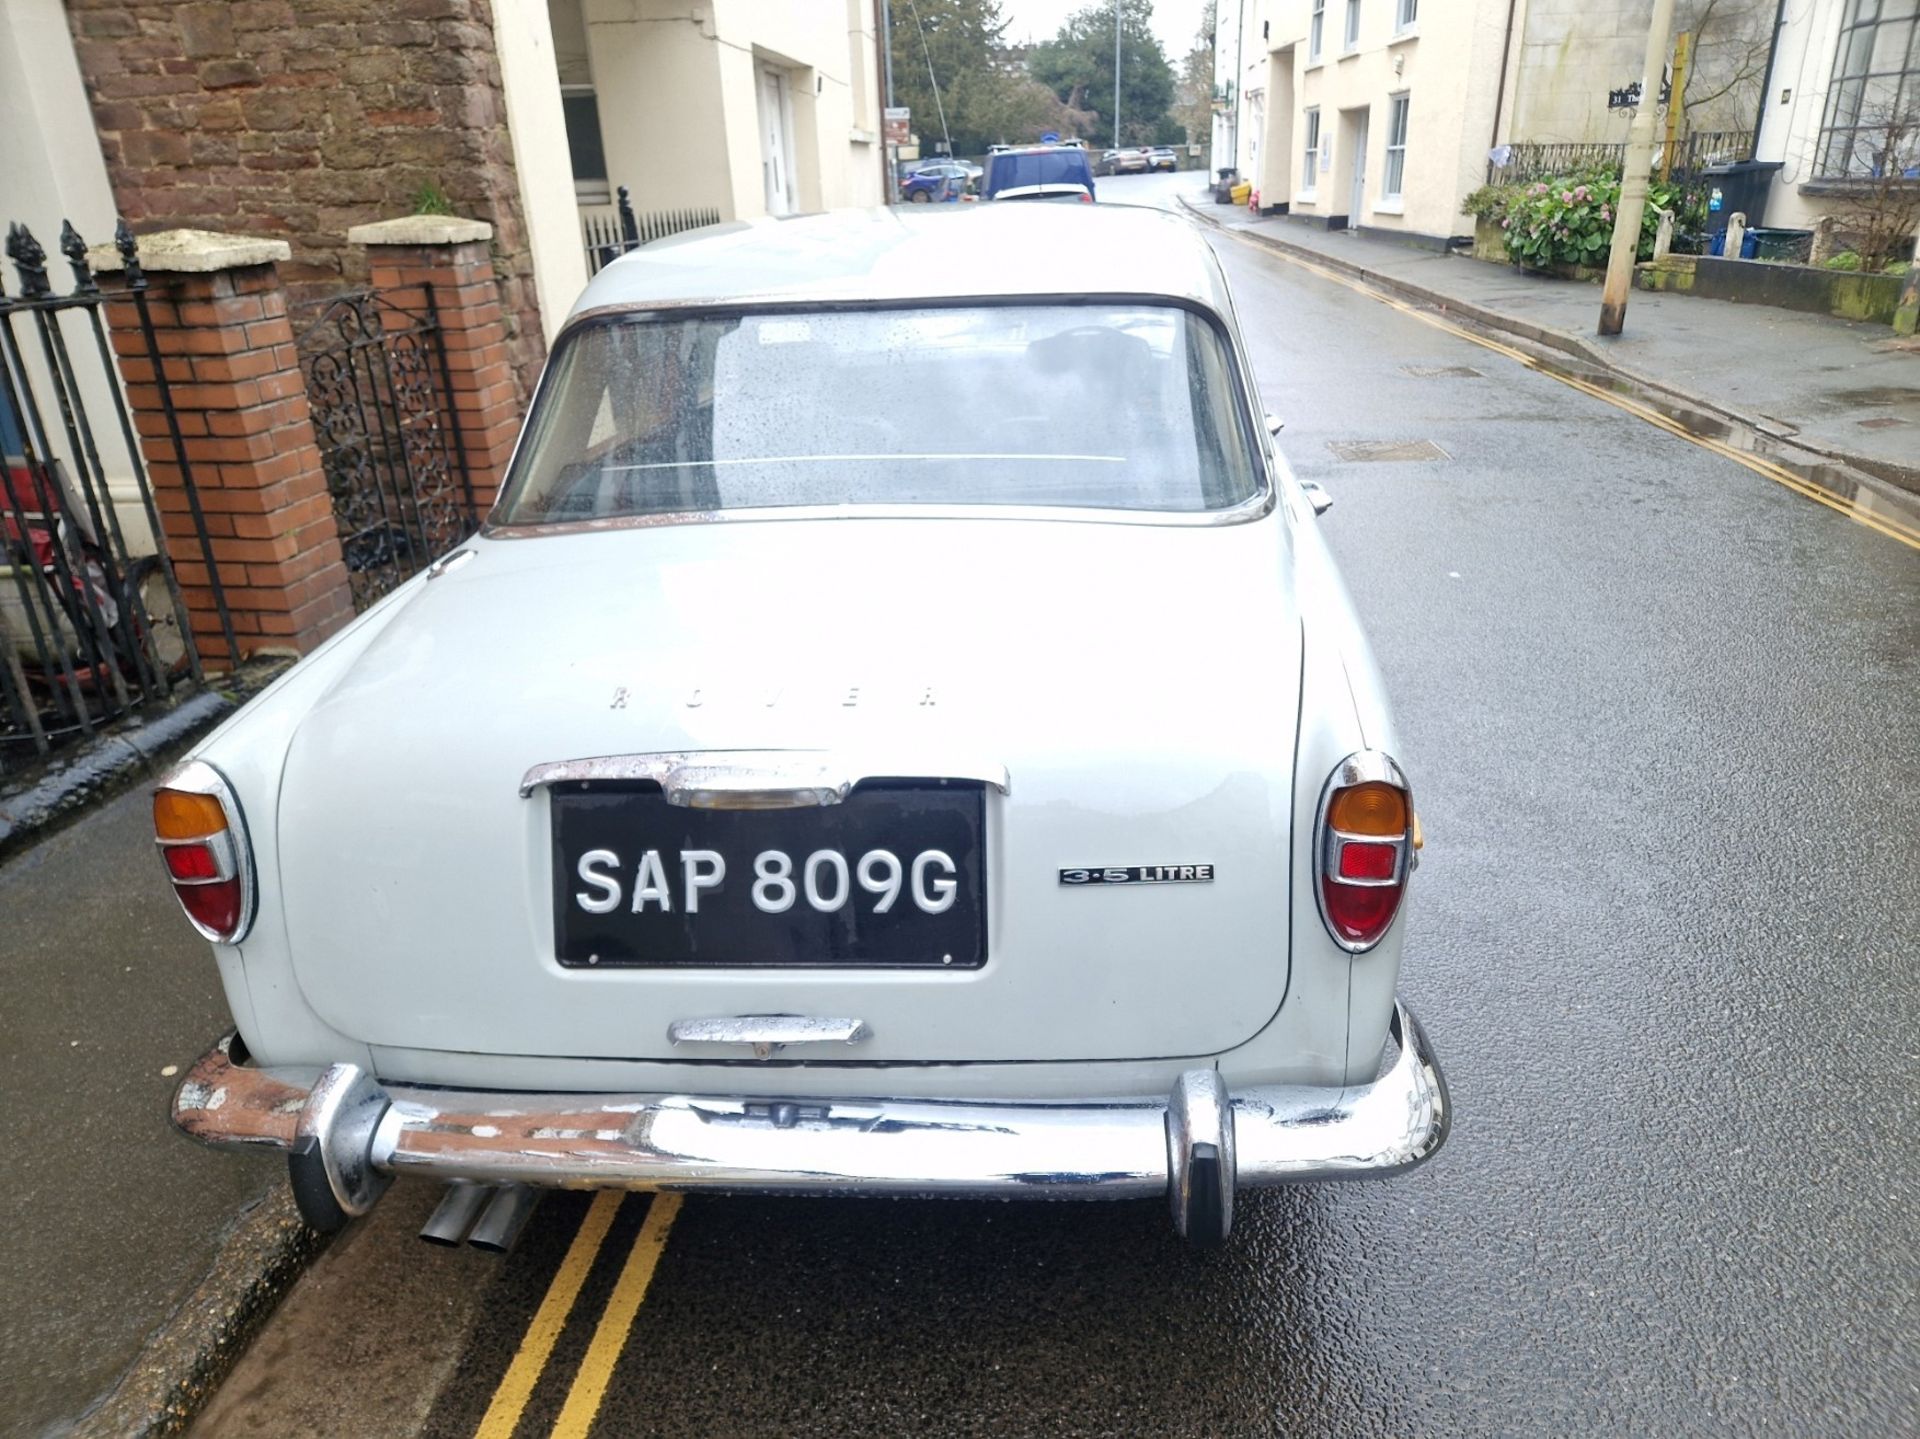 1969 Rover P5B Saloon Registration number SAP 809G Chassis number 84003266B Engine number - Image 11 of 14